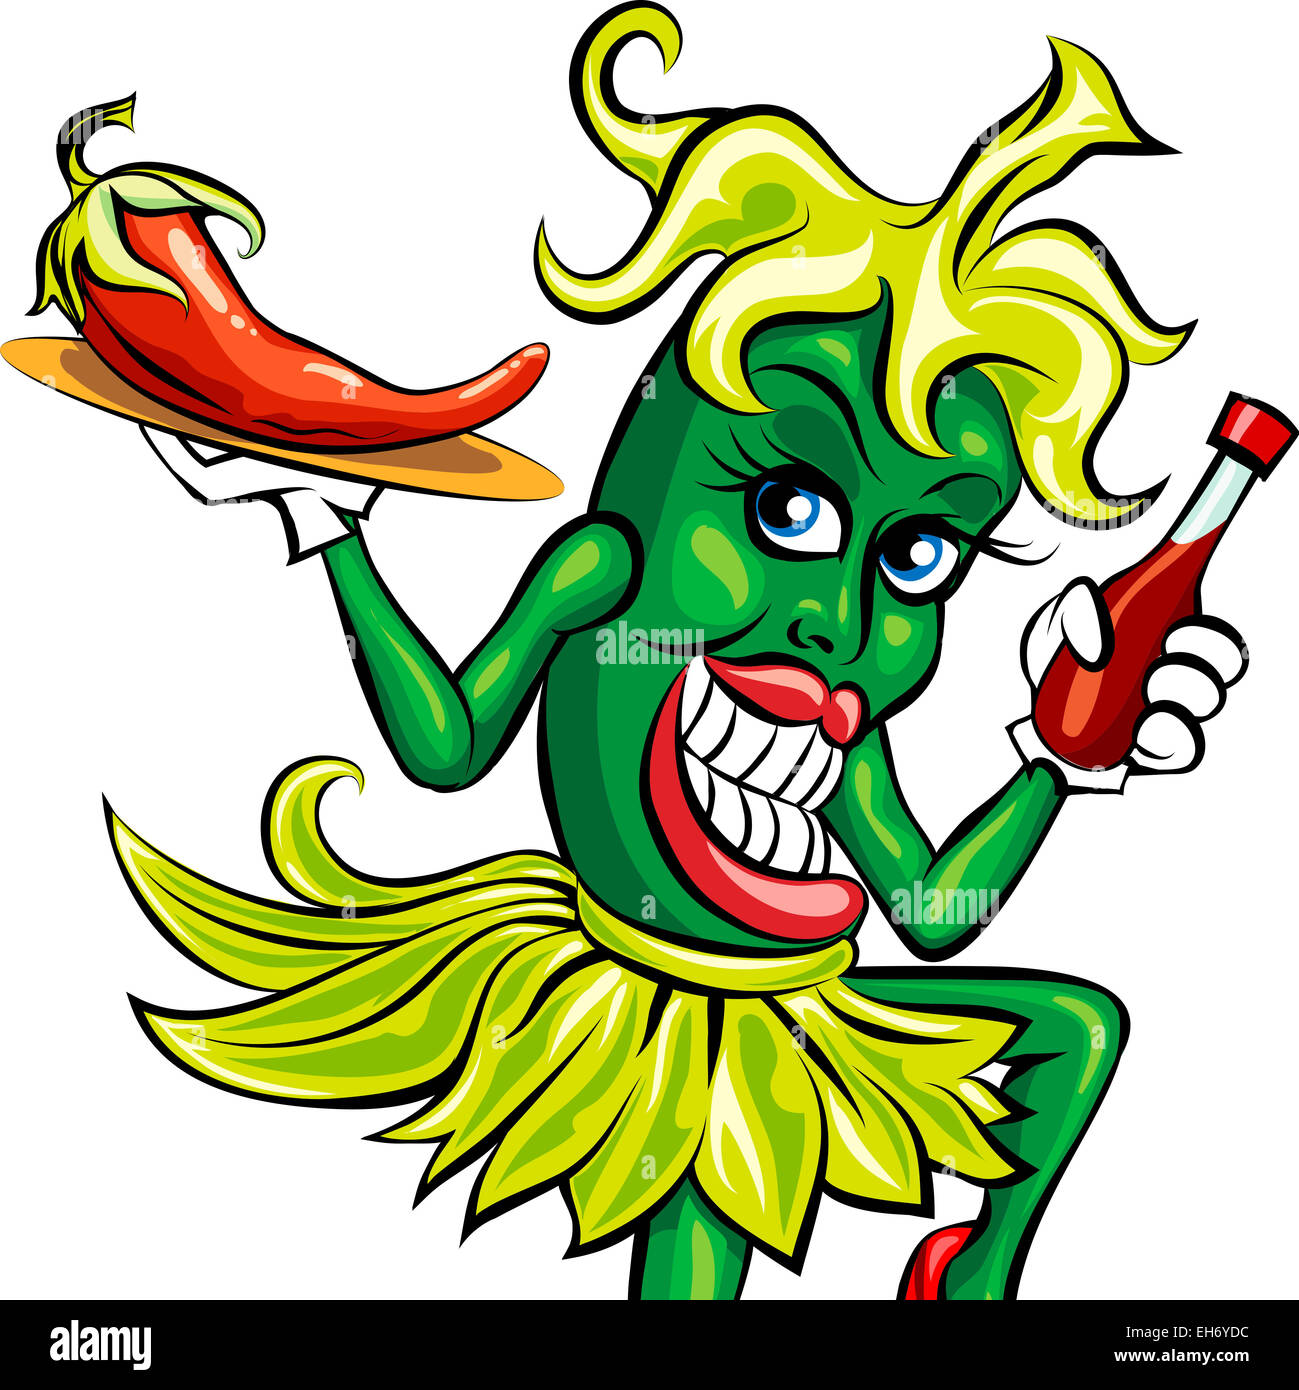 Humorous illustration of green pepper in waitress uniform with a bottle of hot sauce and prepared chili on a tray Stock Photo